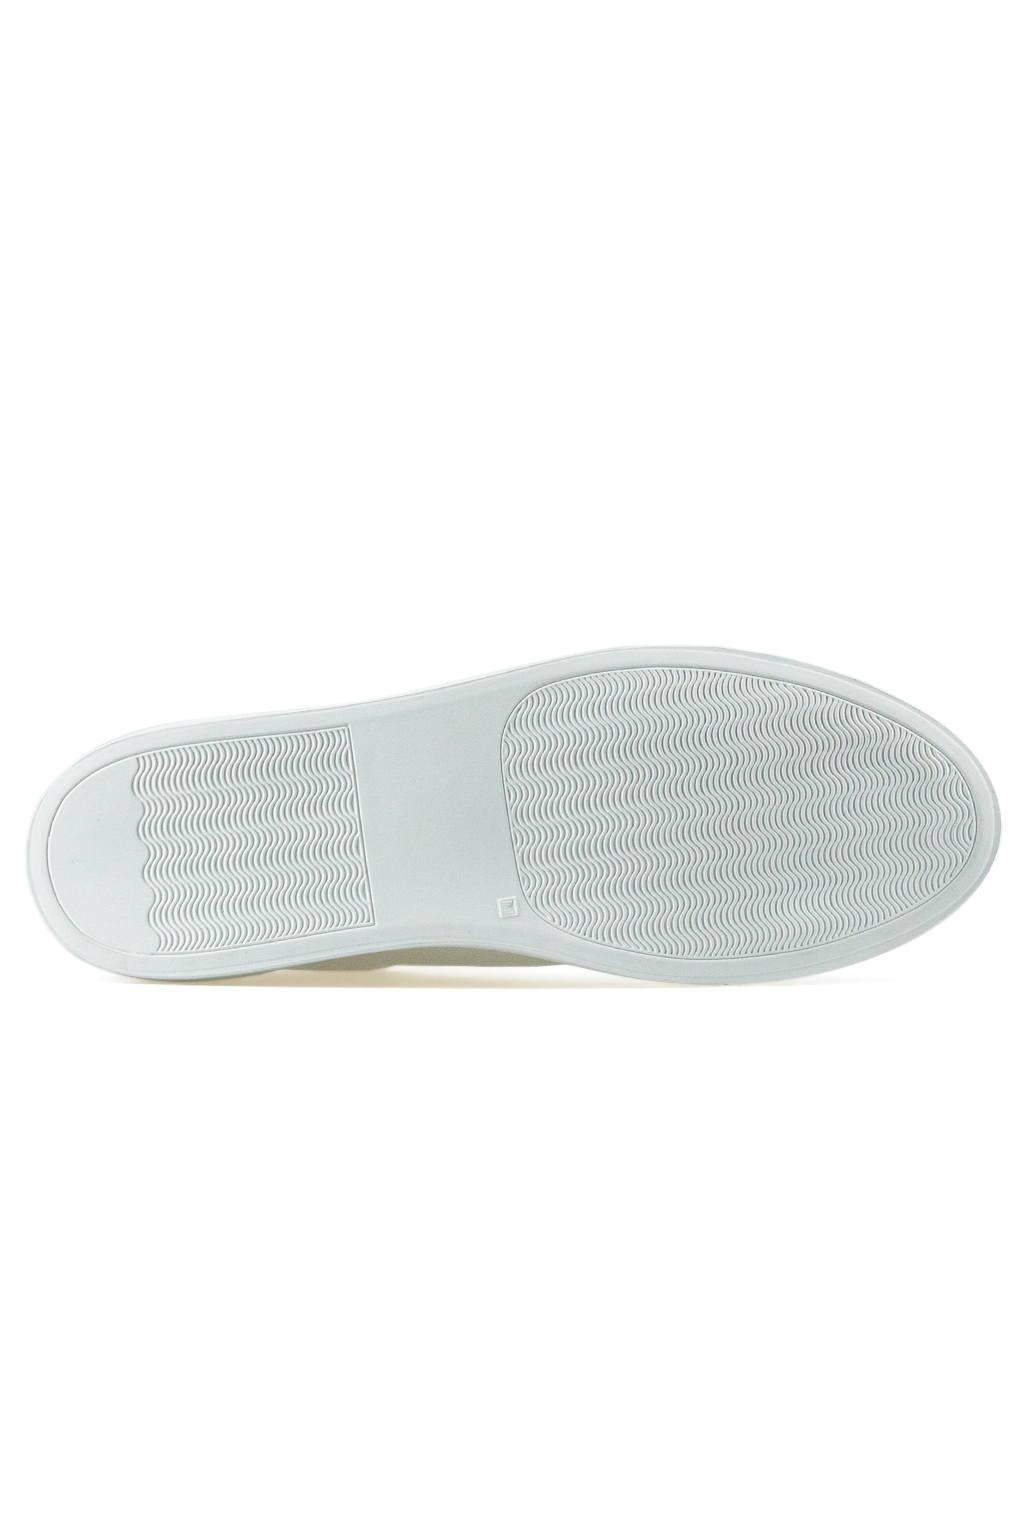 BlueButtonShop - Common Projects - Common-Projects-Retro-Low-White-x ...